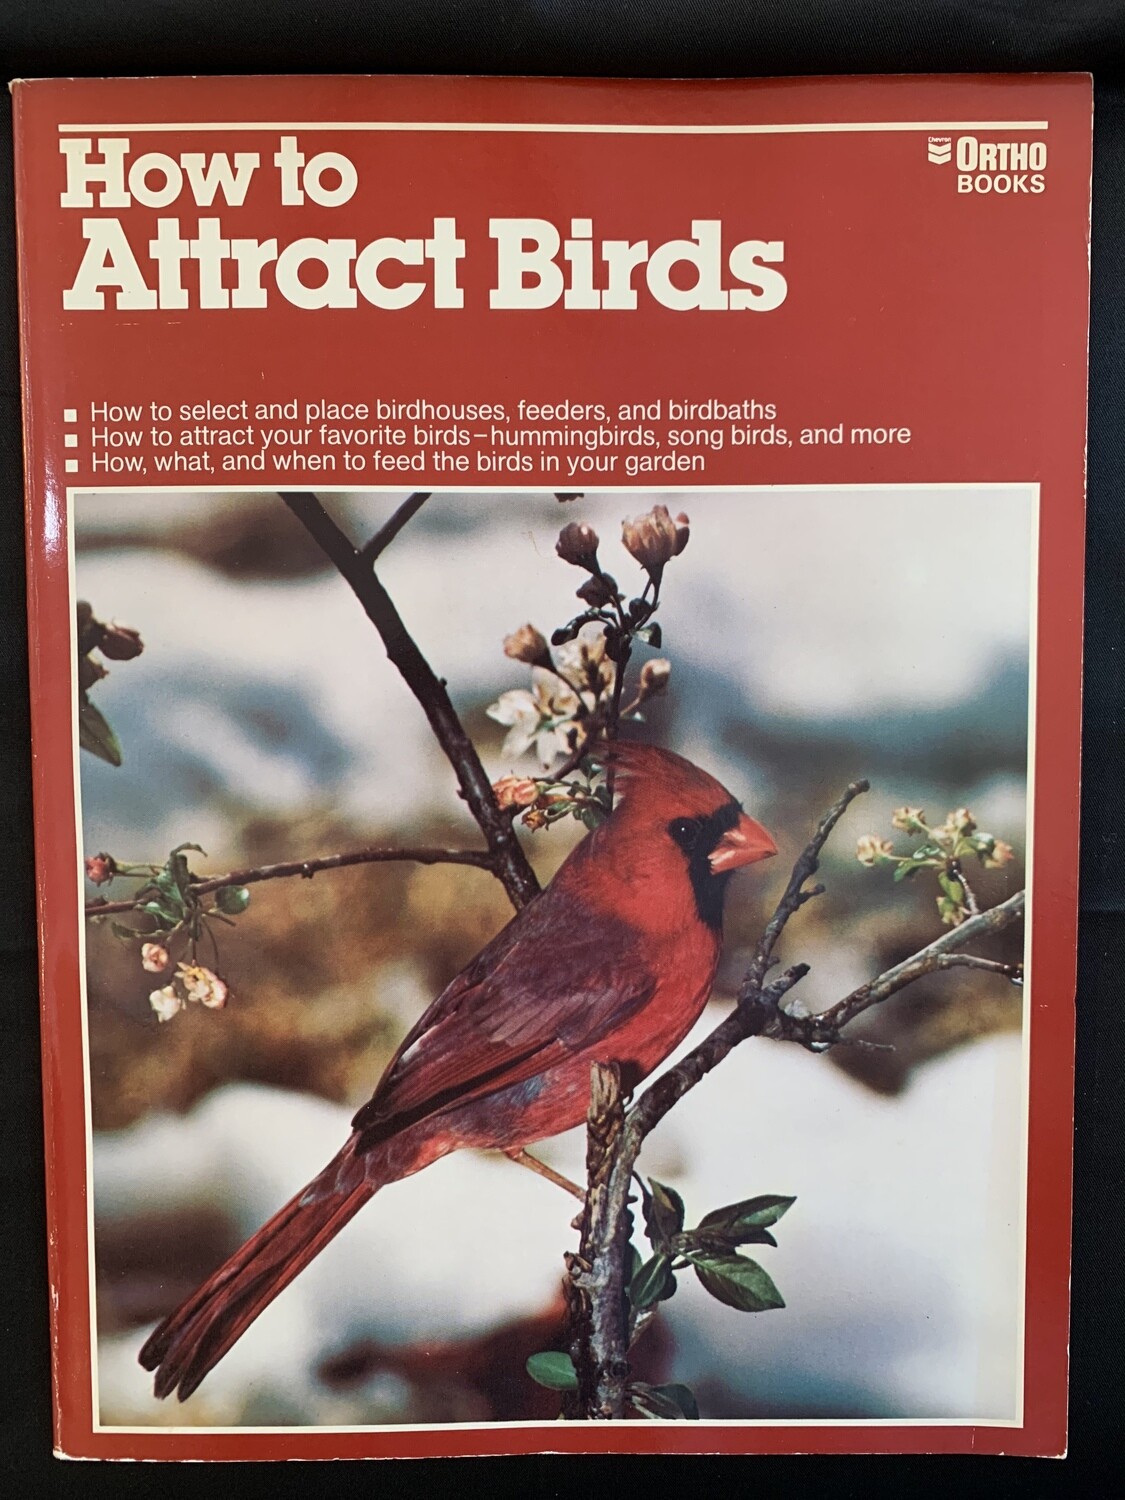 How to Attract Birds - Ortho Books